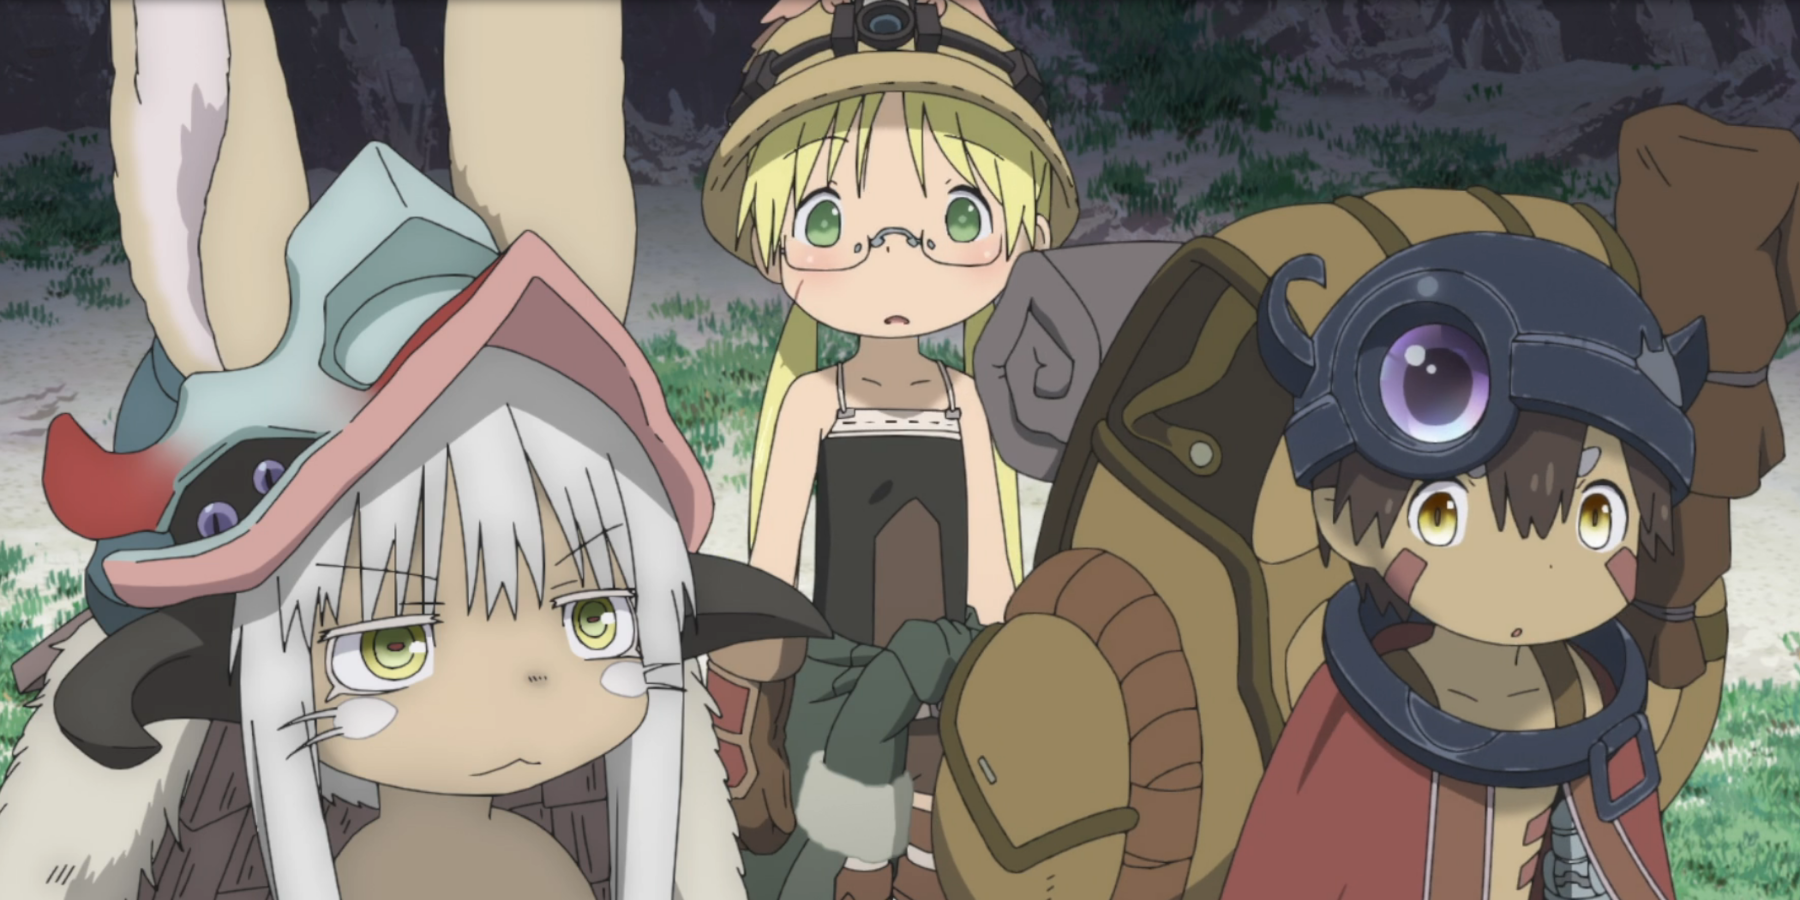 Made in Abyss Season 2 Reveals Episode 2 Preview - Anime Corner